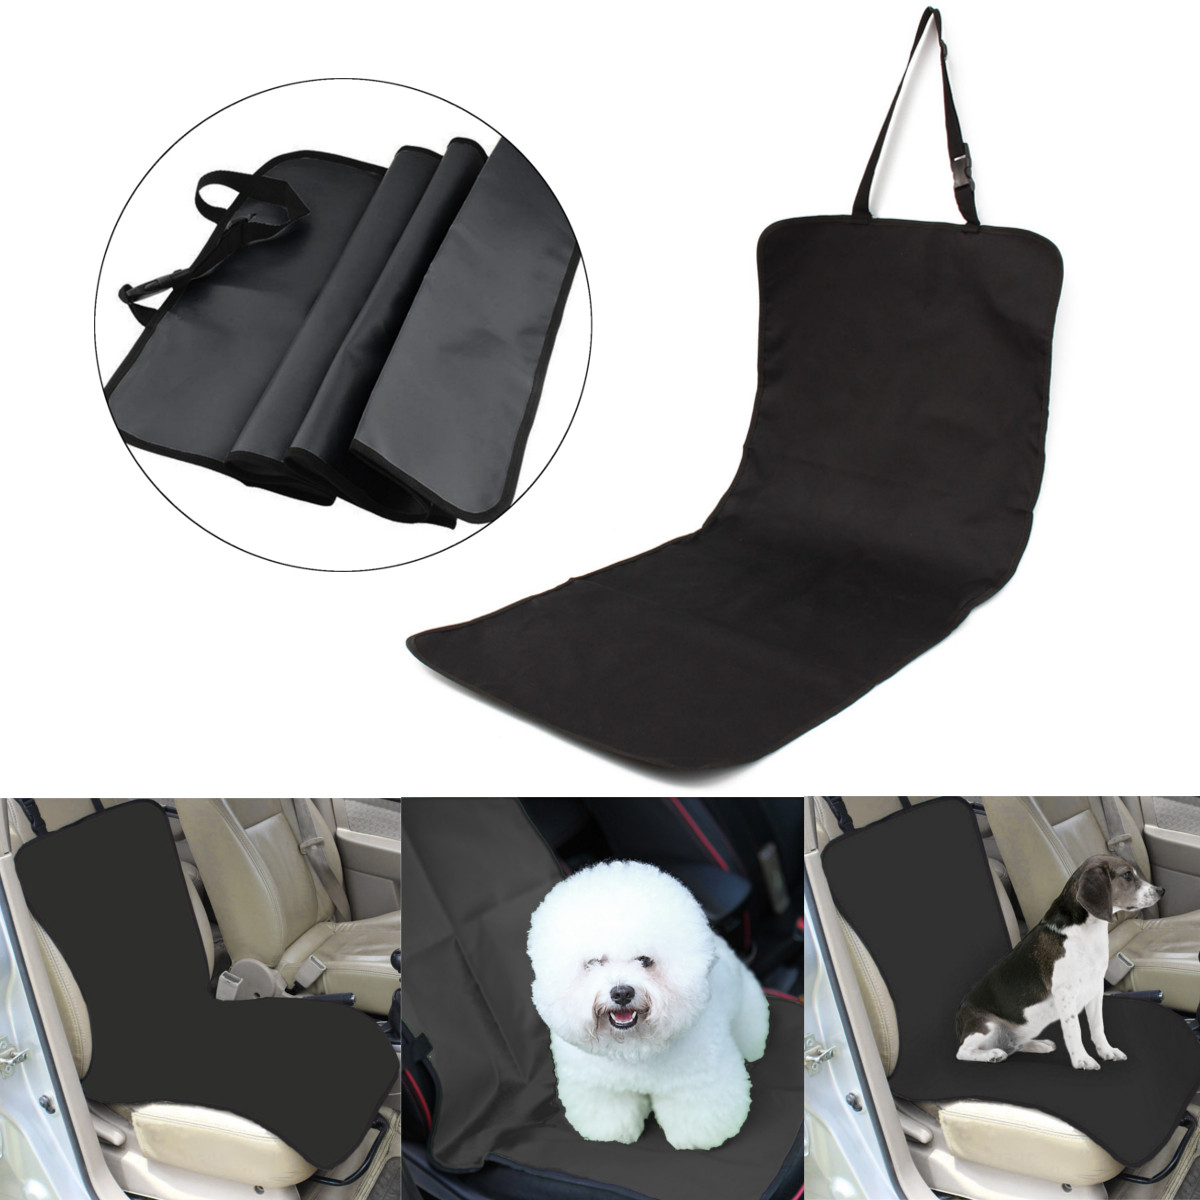 Waterproof-Oxford-Pet-Dog-Cat-Car-Front-Seat-Cover-Protector-Mat-Blanket-Travel-1157525